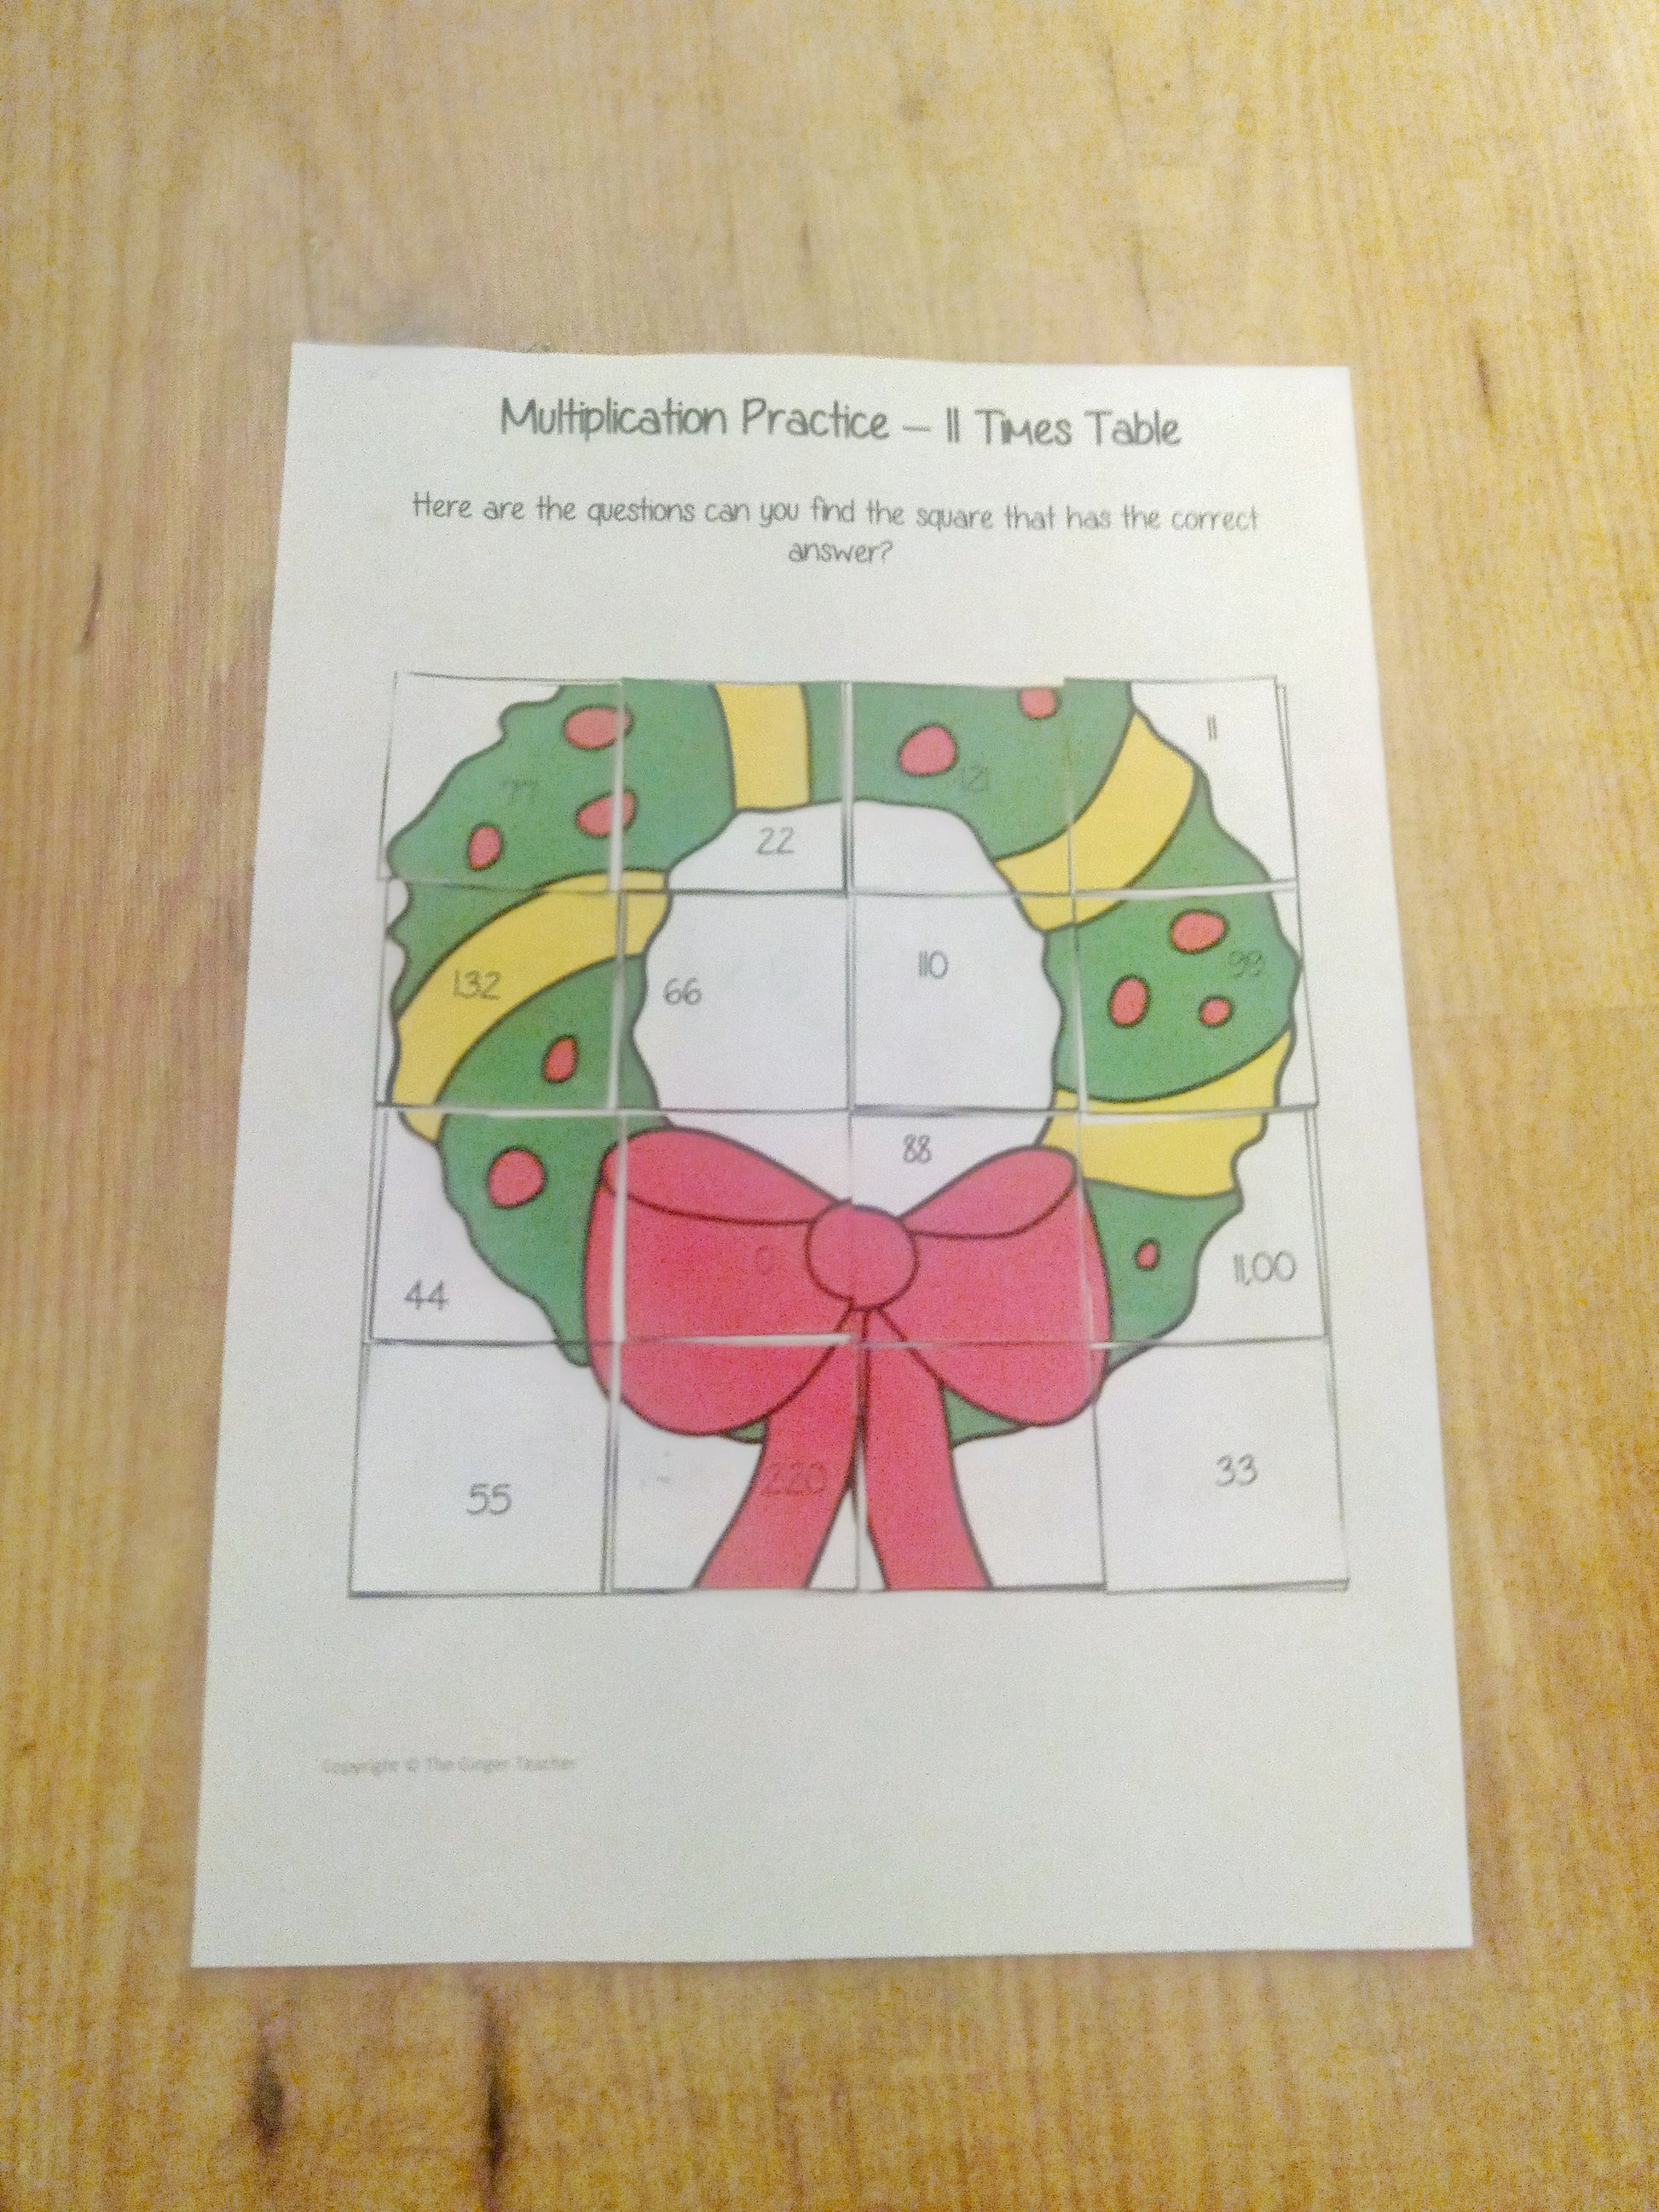 Christmas Themed Independent Multiplication Revision Sheets 11x No Prep independent revision activity for the eleven times tables. Children have to cut out and stick the correct answer to the question square, when the correct squares are all in place a christmas themed picture will be revealed. #teachmultiplication #revisemultiplication #eleventimestables #noprep #mathsworksheets